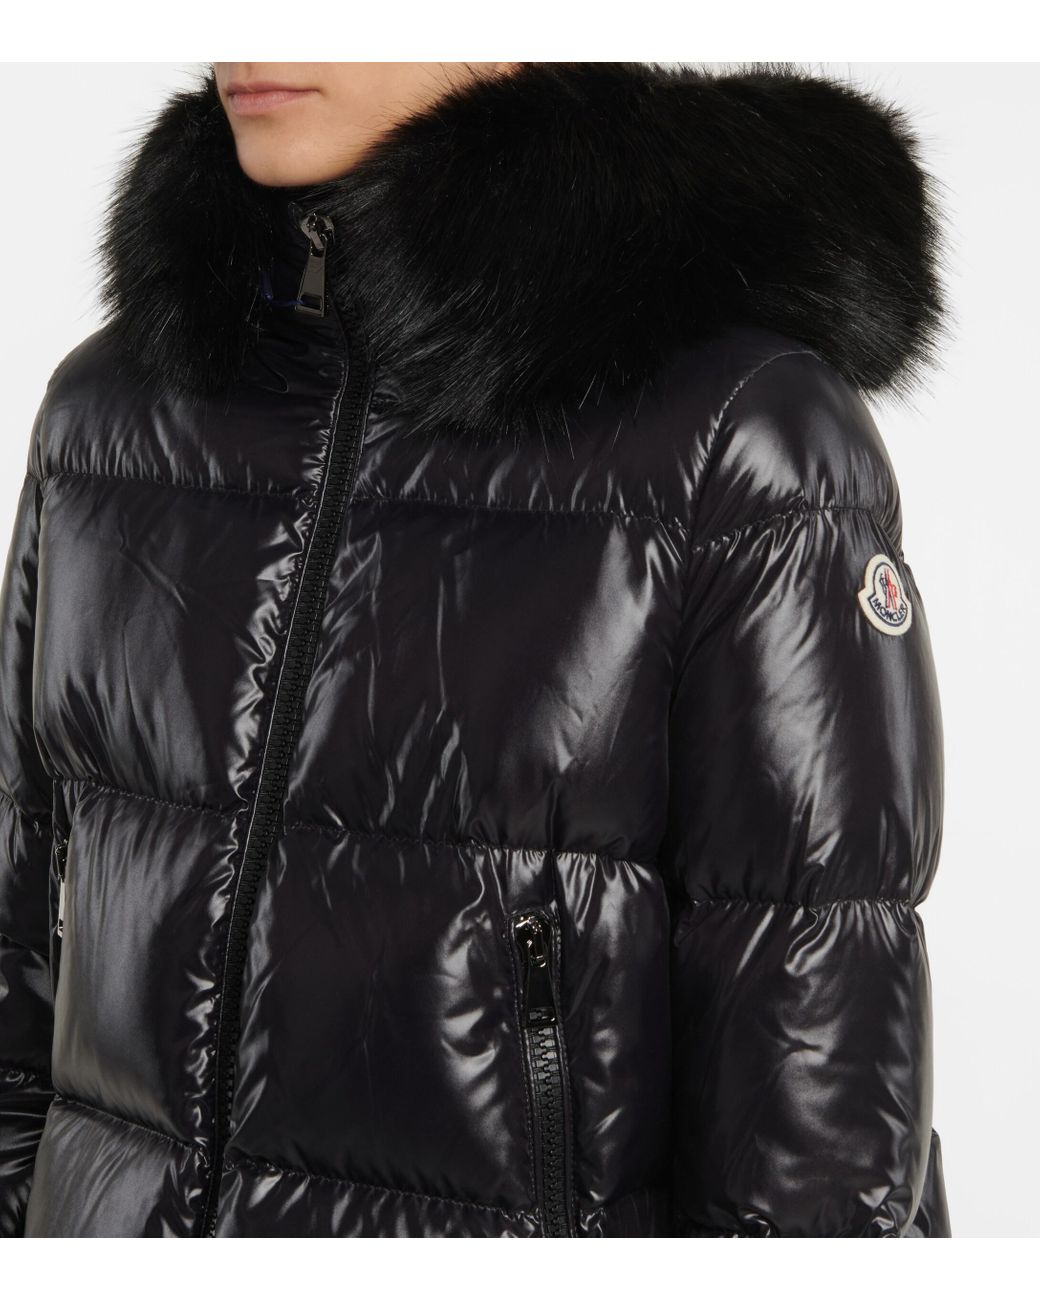 moncler wet look jacket,OFF 78%,www.concordehotels.com.tr